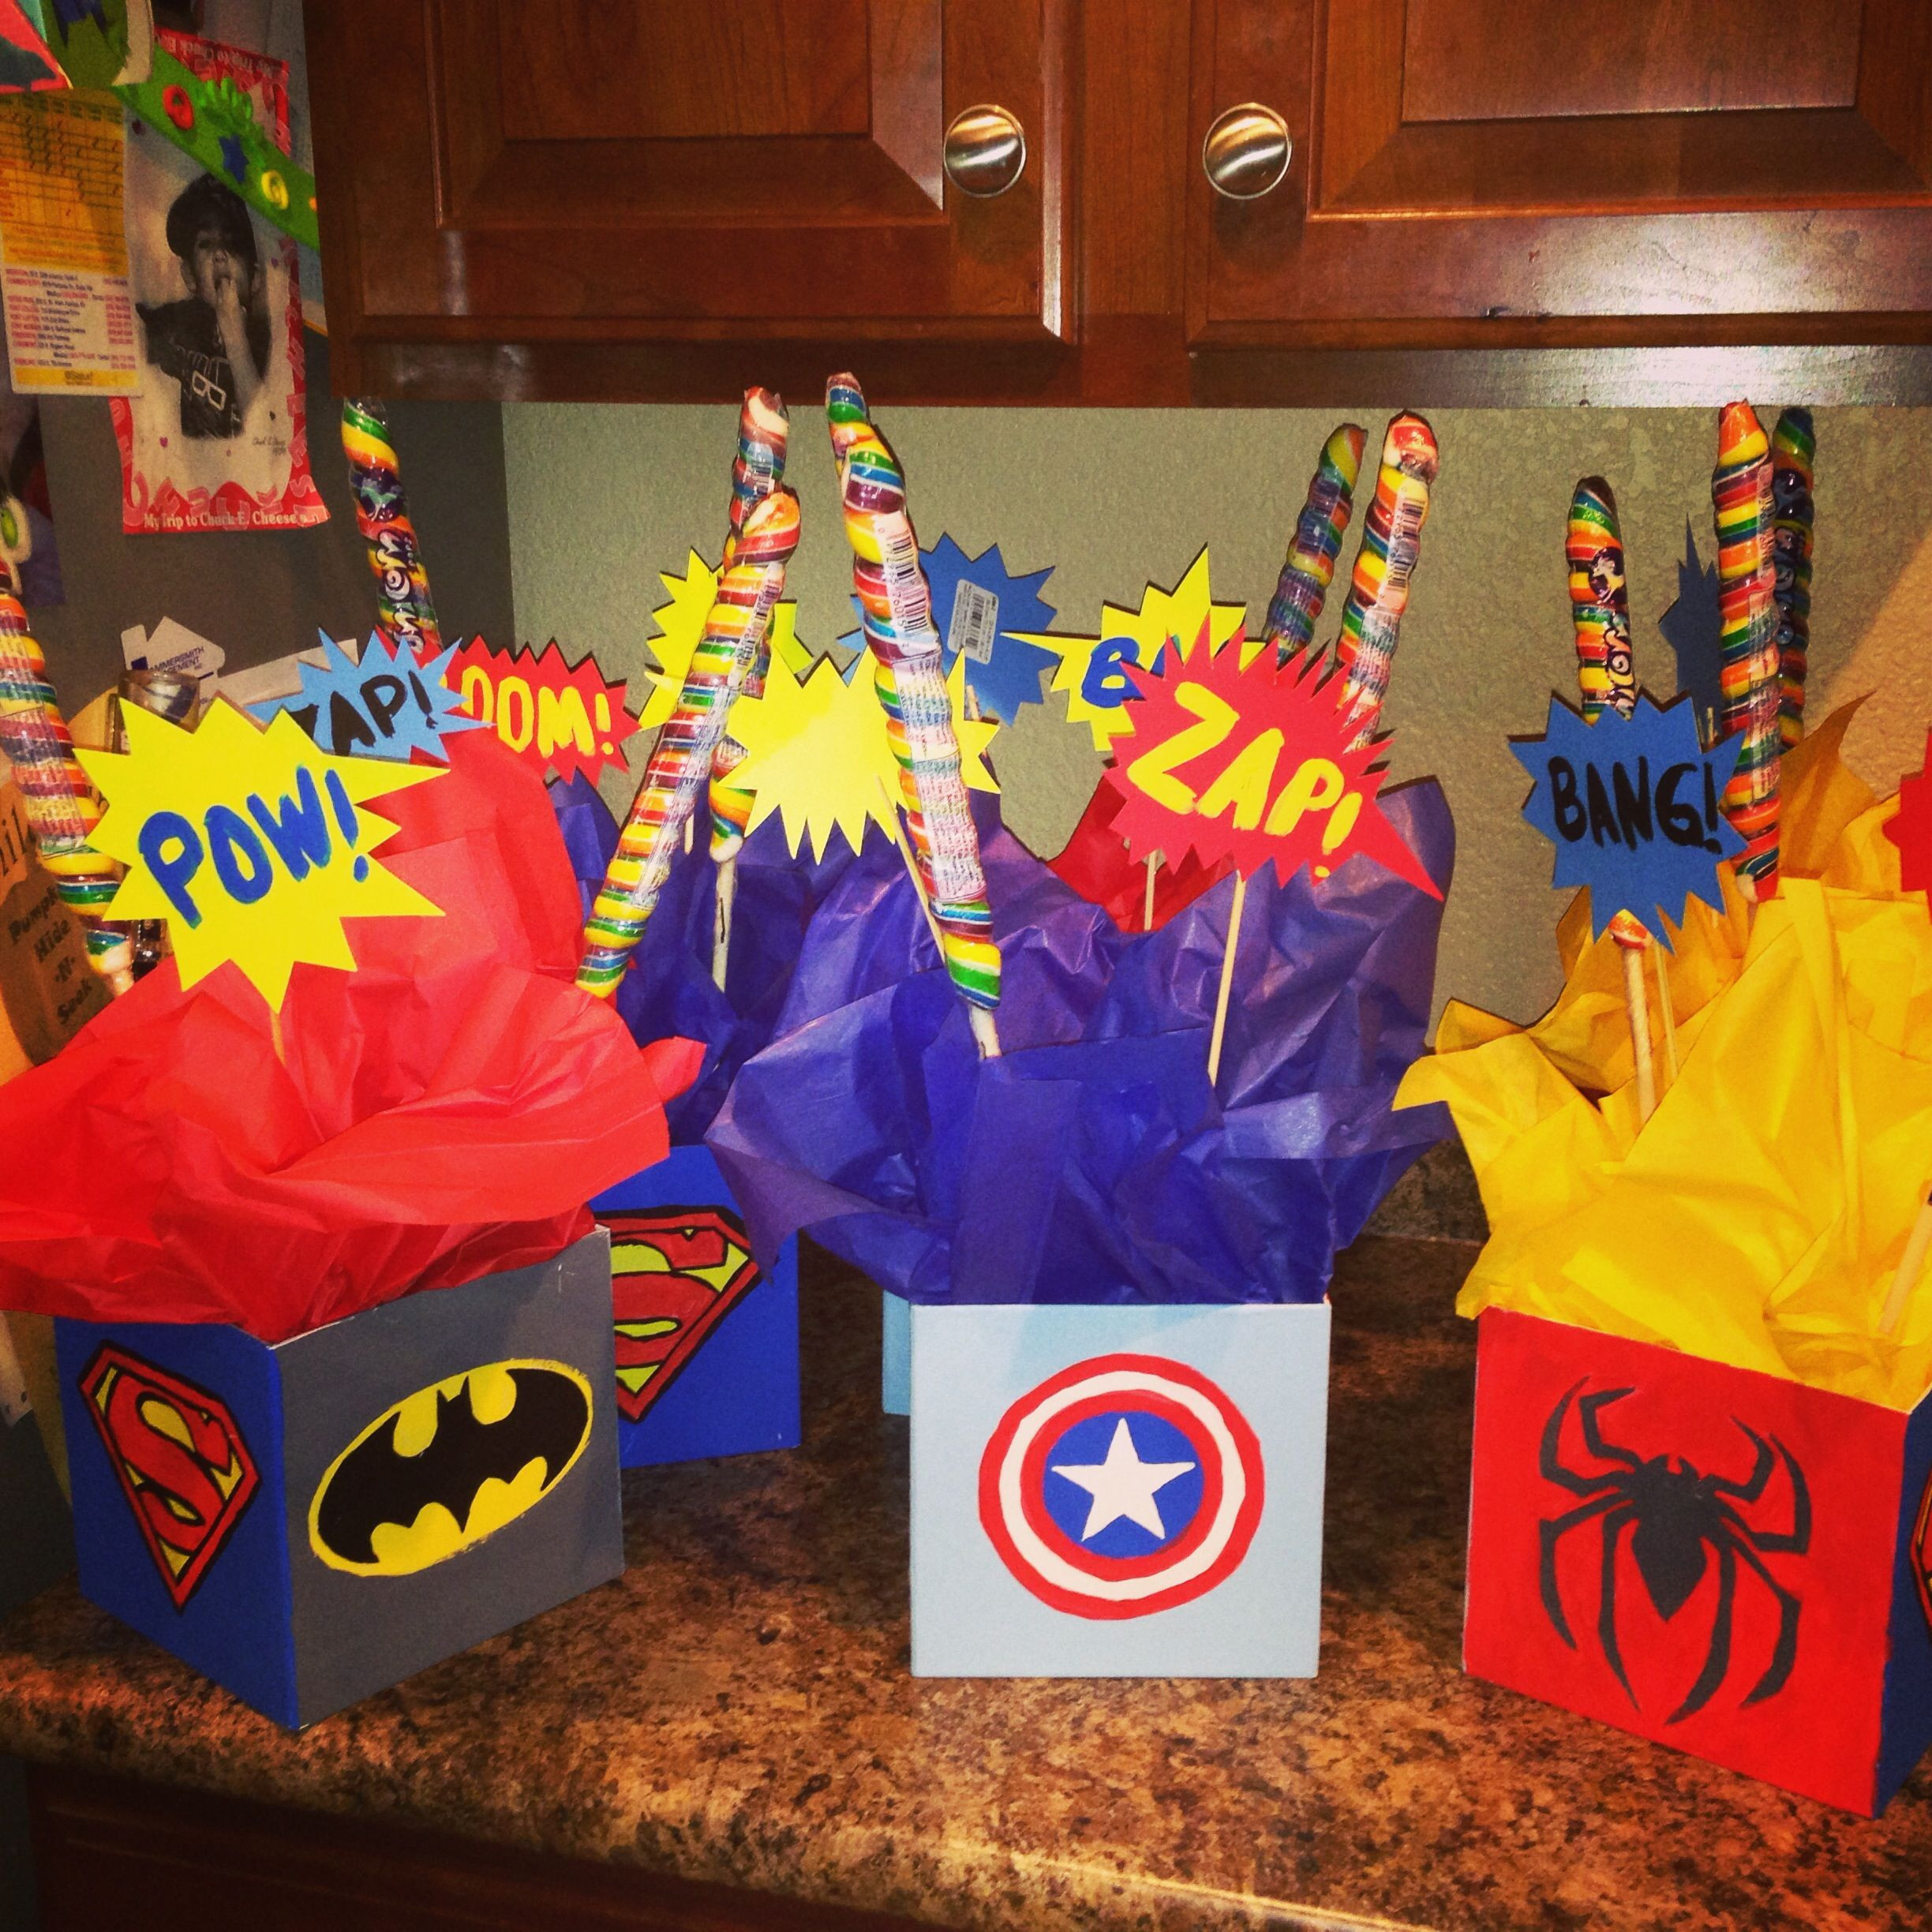 Batman Birthday Party Ideas 4 Year Old
 Superhero party center pieces for my 5 year old son